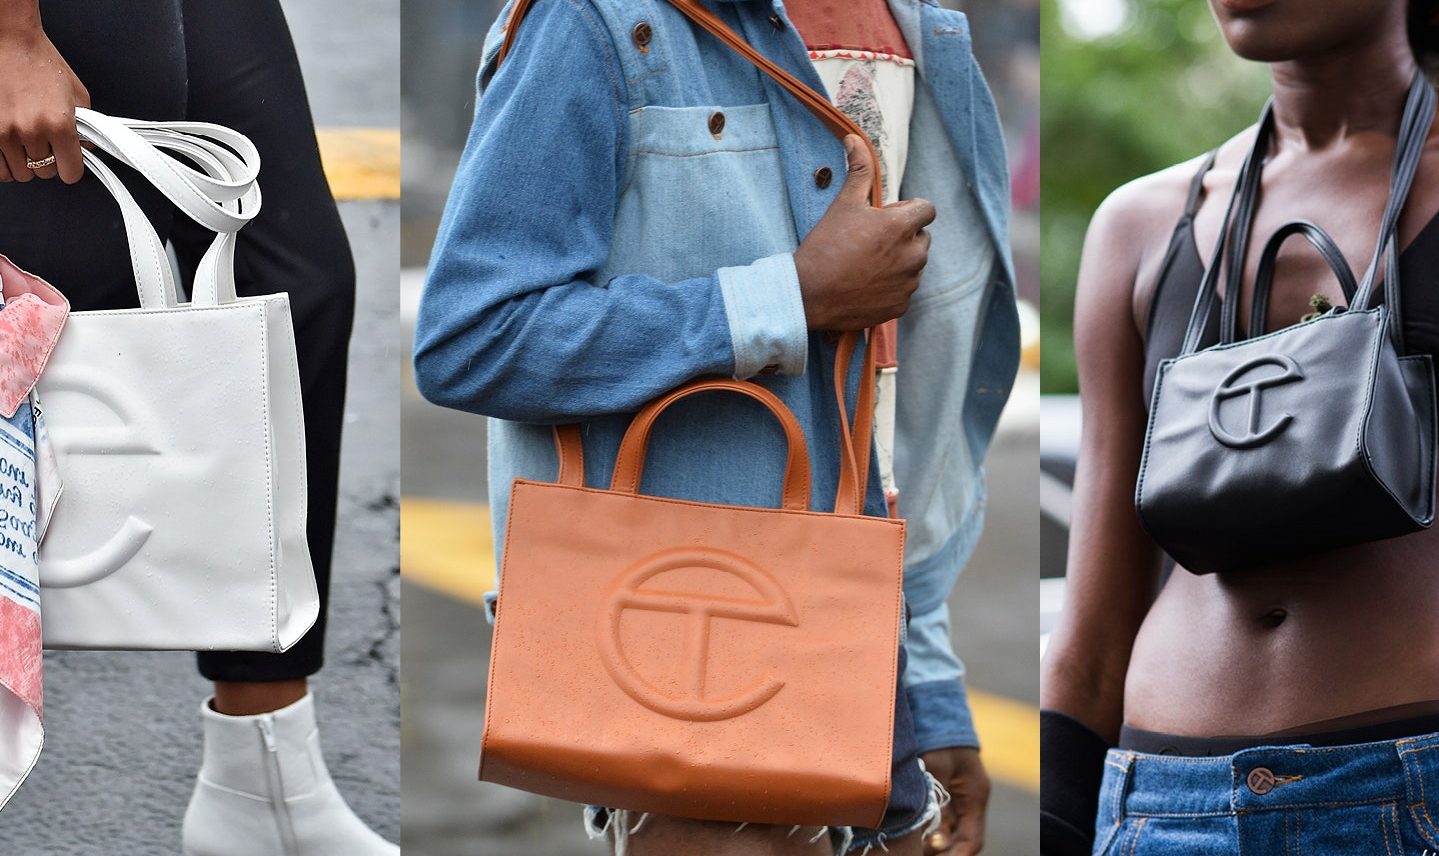 Telfar Bag or Faux? How To Spot The Real Thing